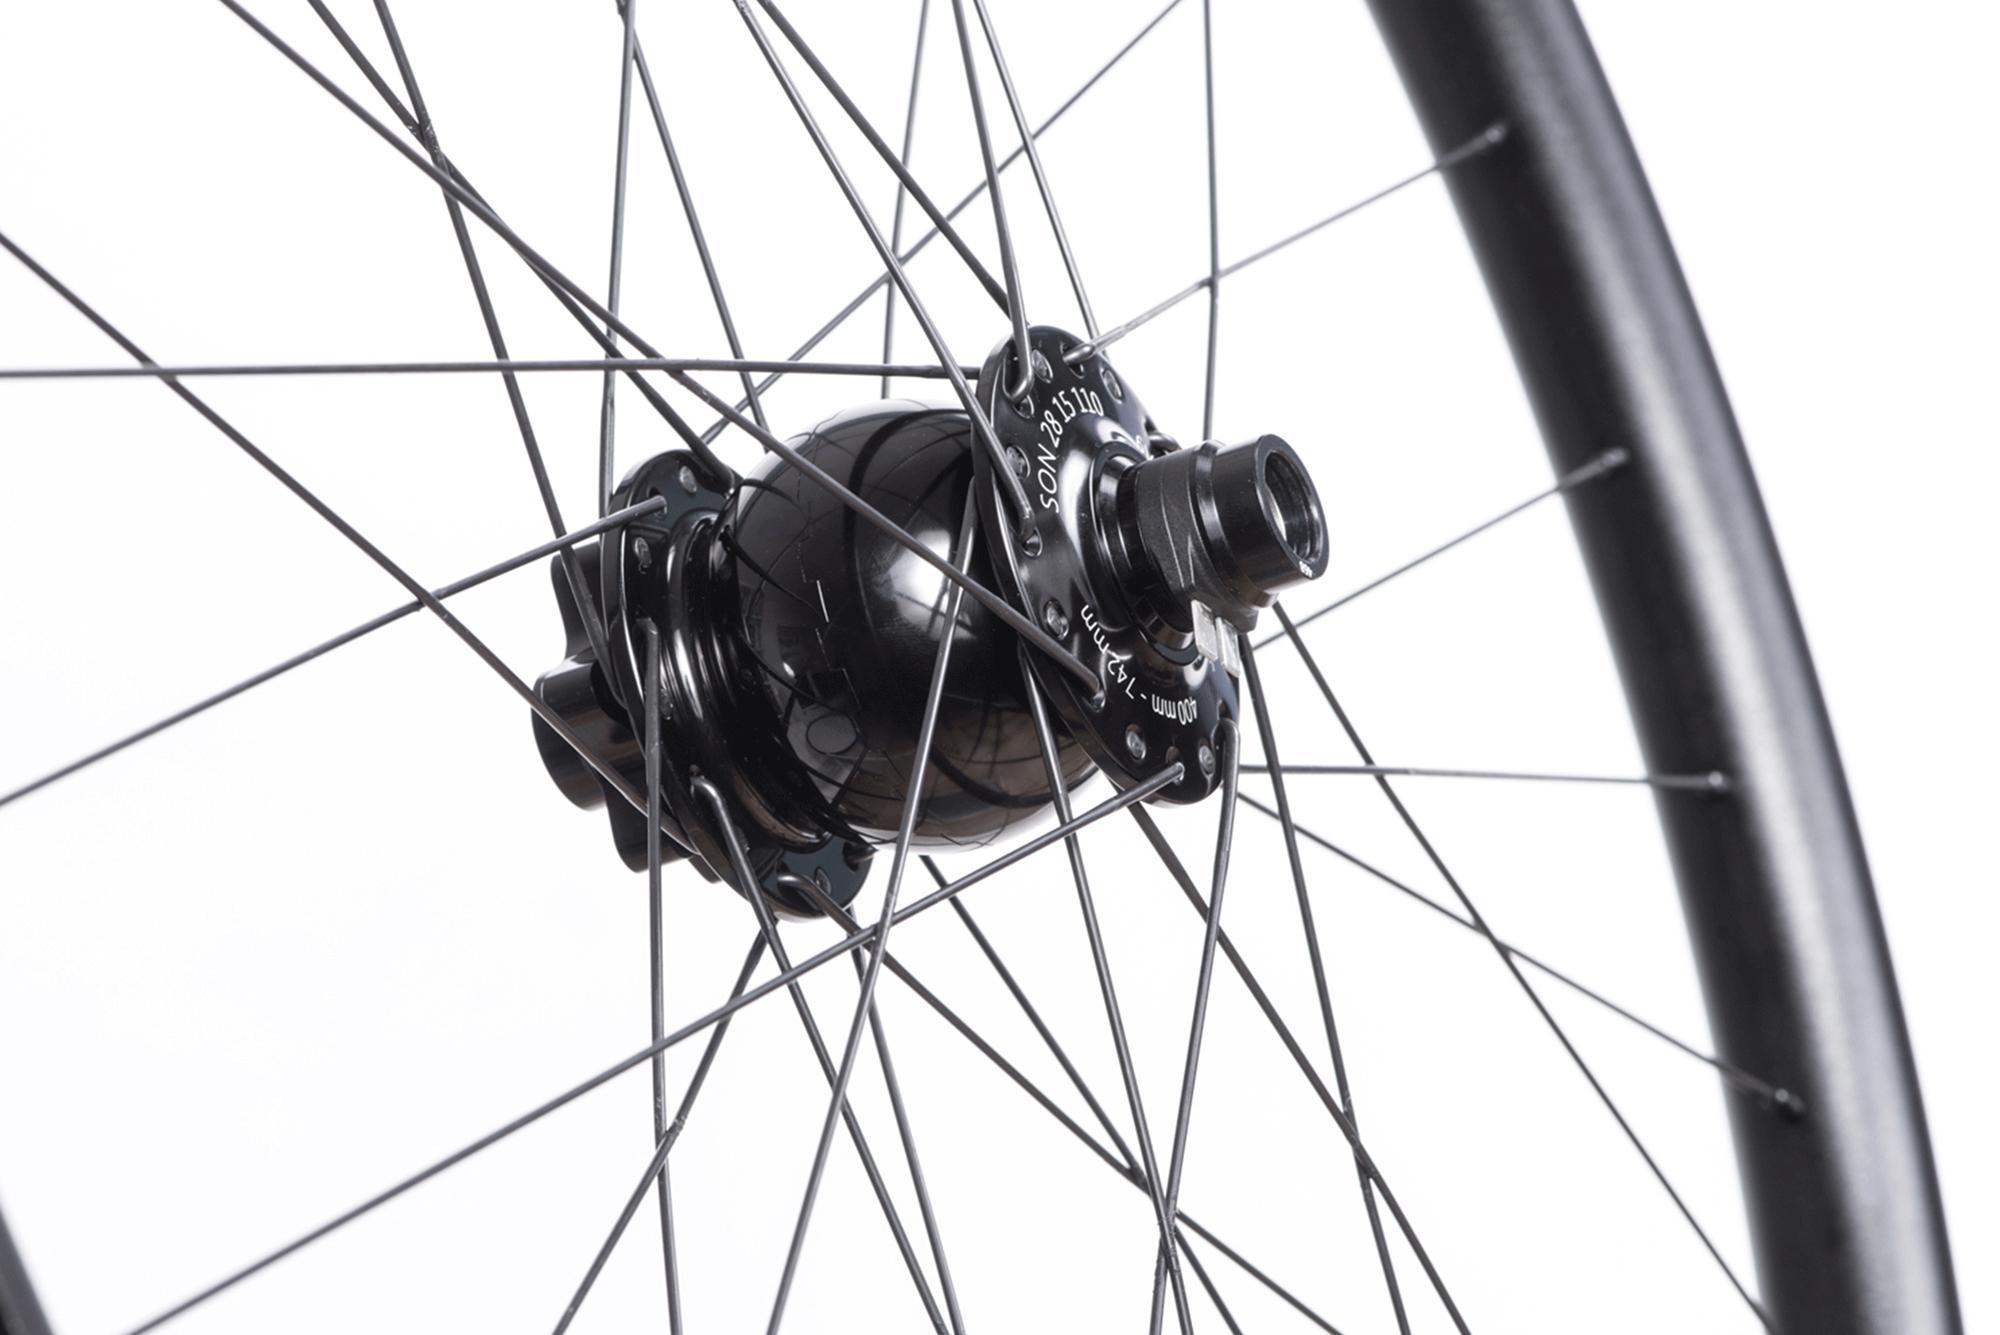 <html><h1>Made for how you ride</h1><i>Enhanced to perfectly compliment your riding, the Search 29 Dynamo Disc is for those "Josh" type of riders. Just pack your bags and enjoy complete freedom without boundaries.</i></html>